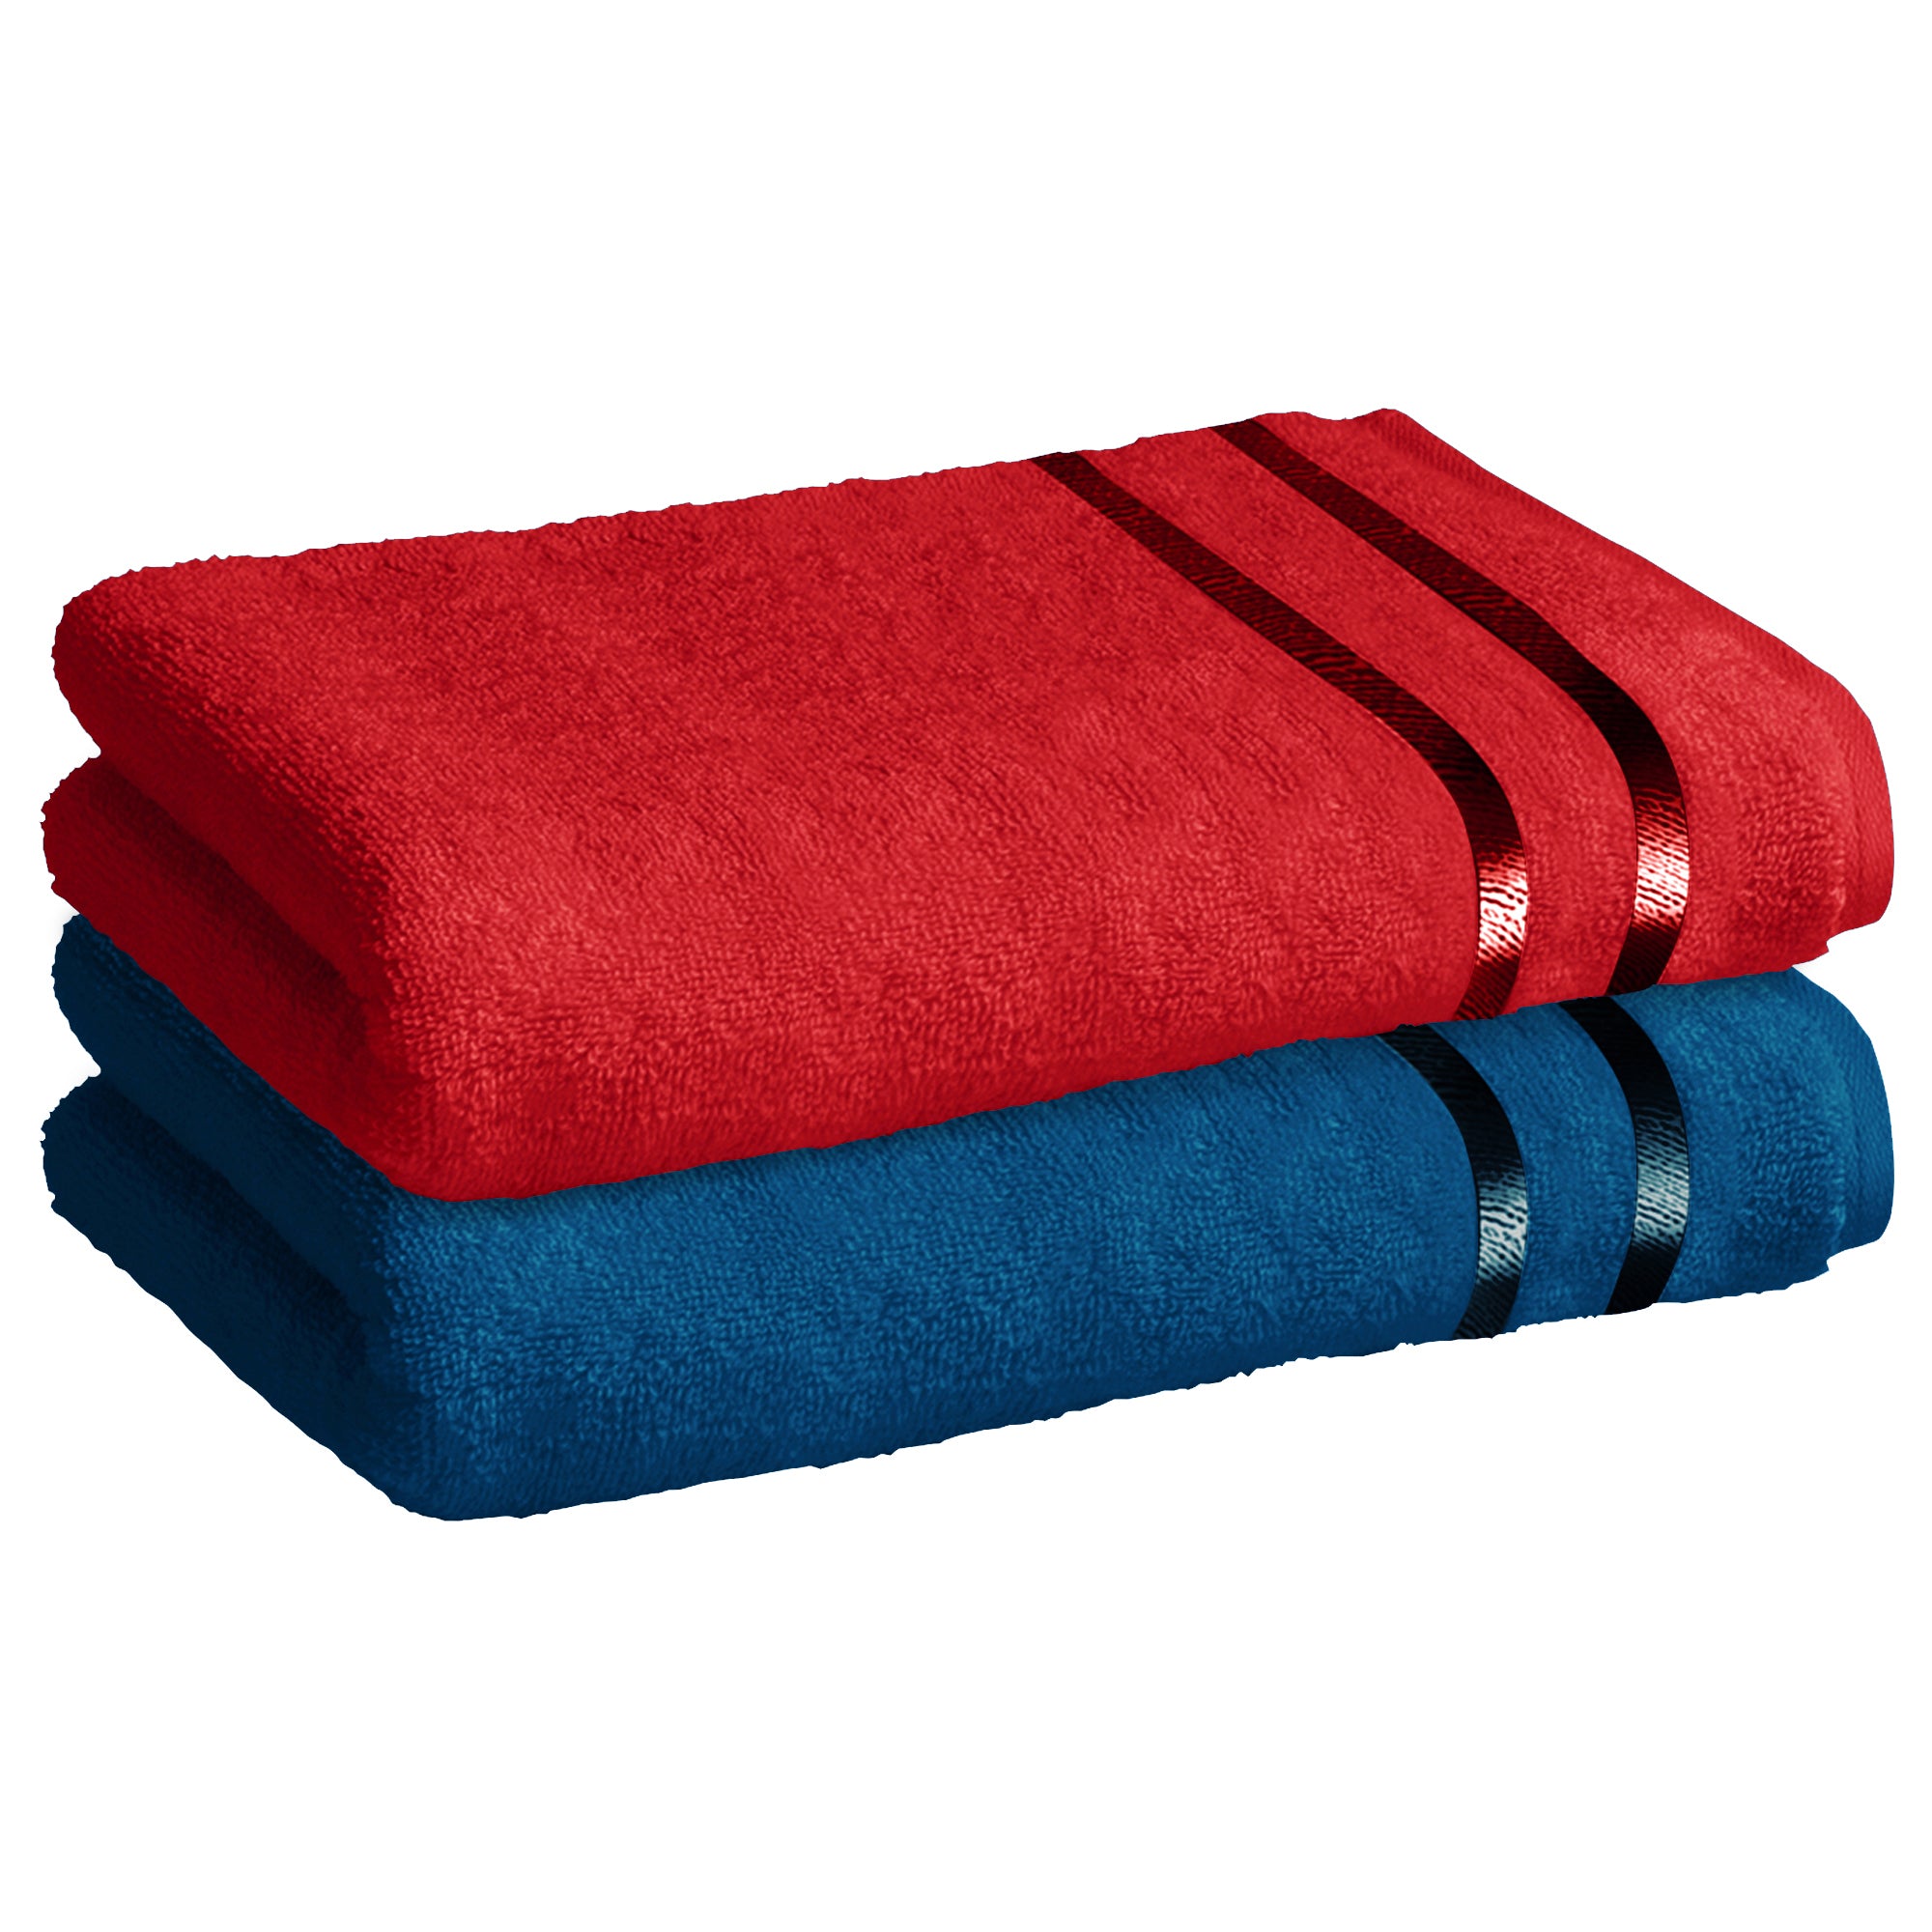 Story@Home 2 Units 100% Cotton Bath Towels - Navy Blue and Wine Red